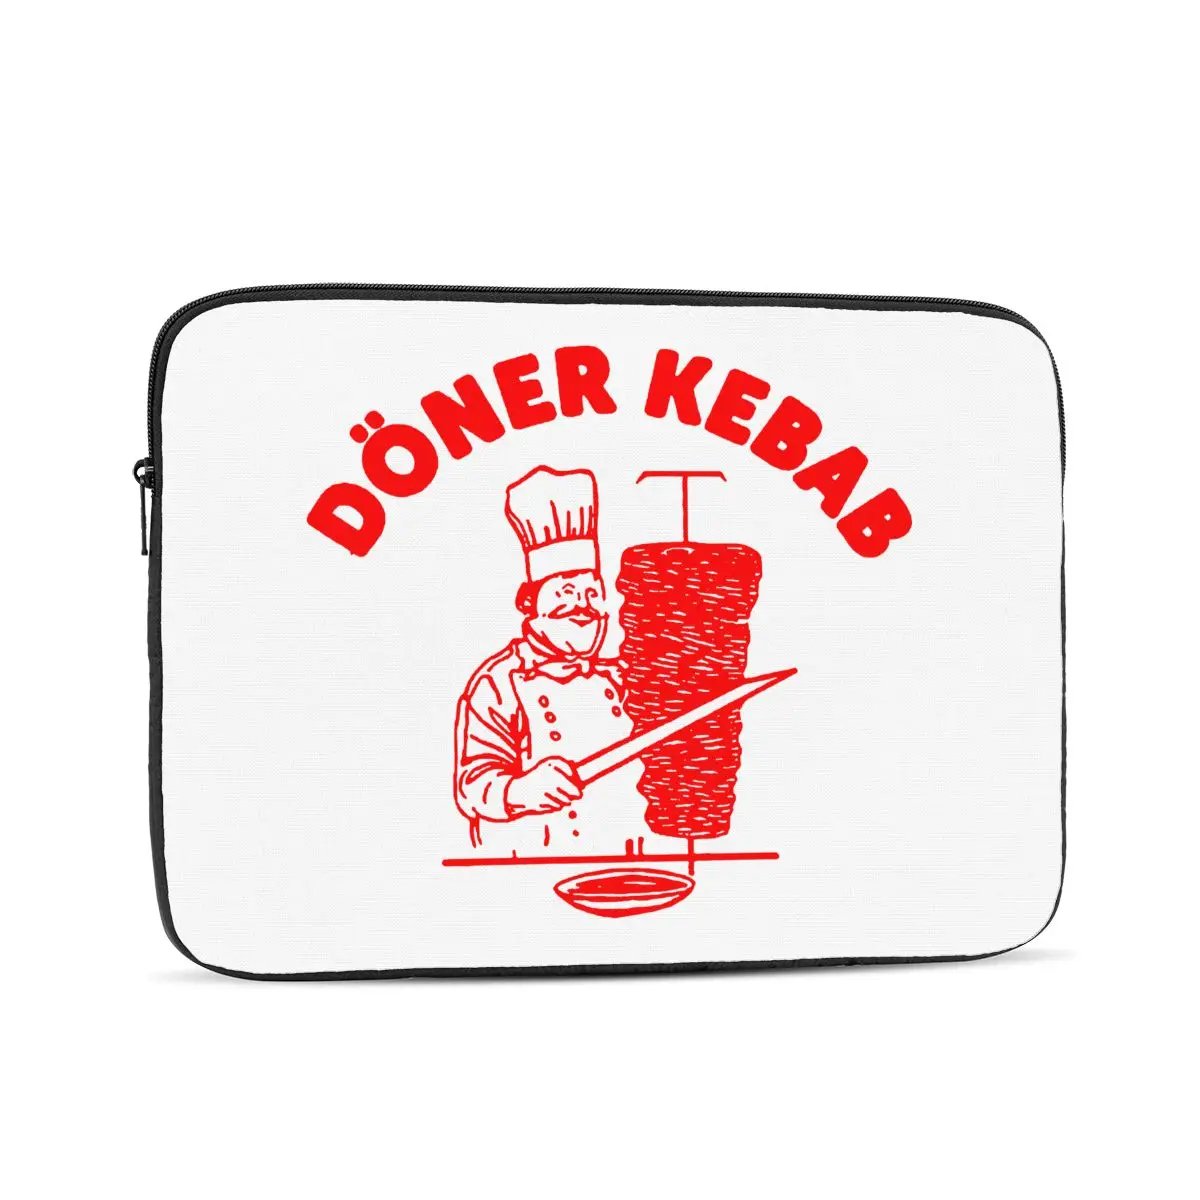 

Doner Kebab Computer ipad Laptop Cover Case Laptop Sleeve Bag Portable Cover Fundas Pouch